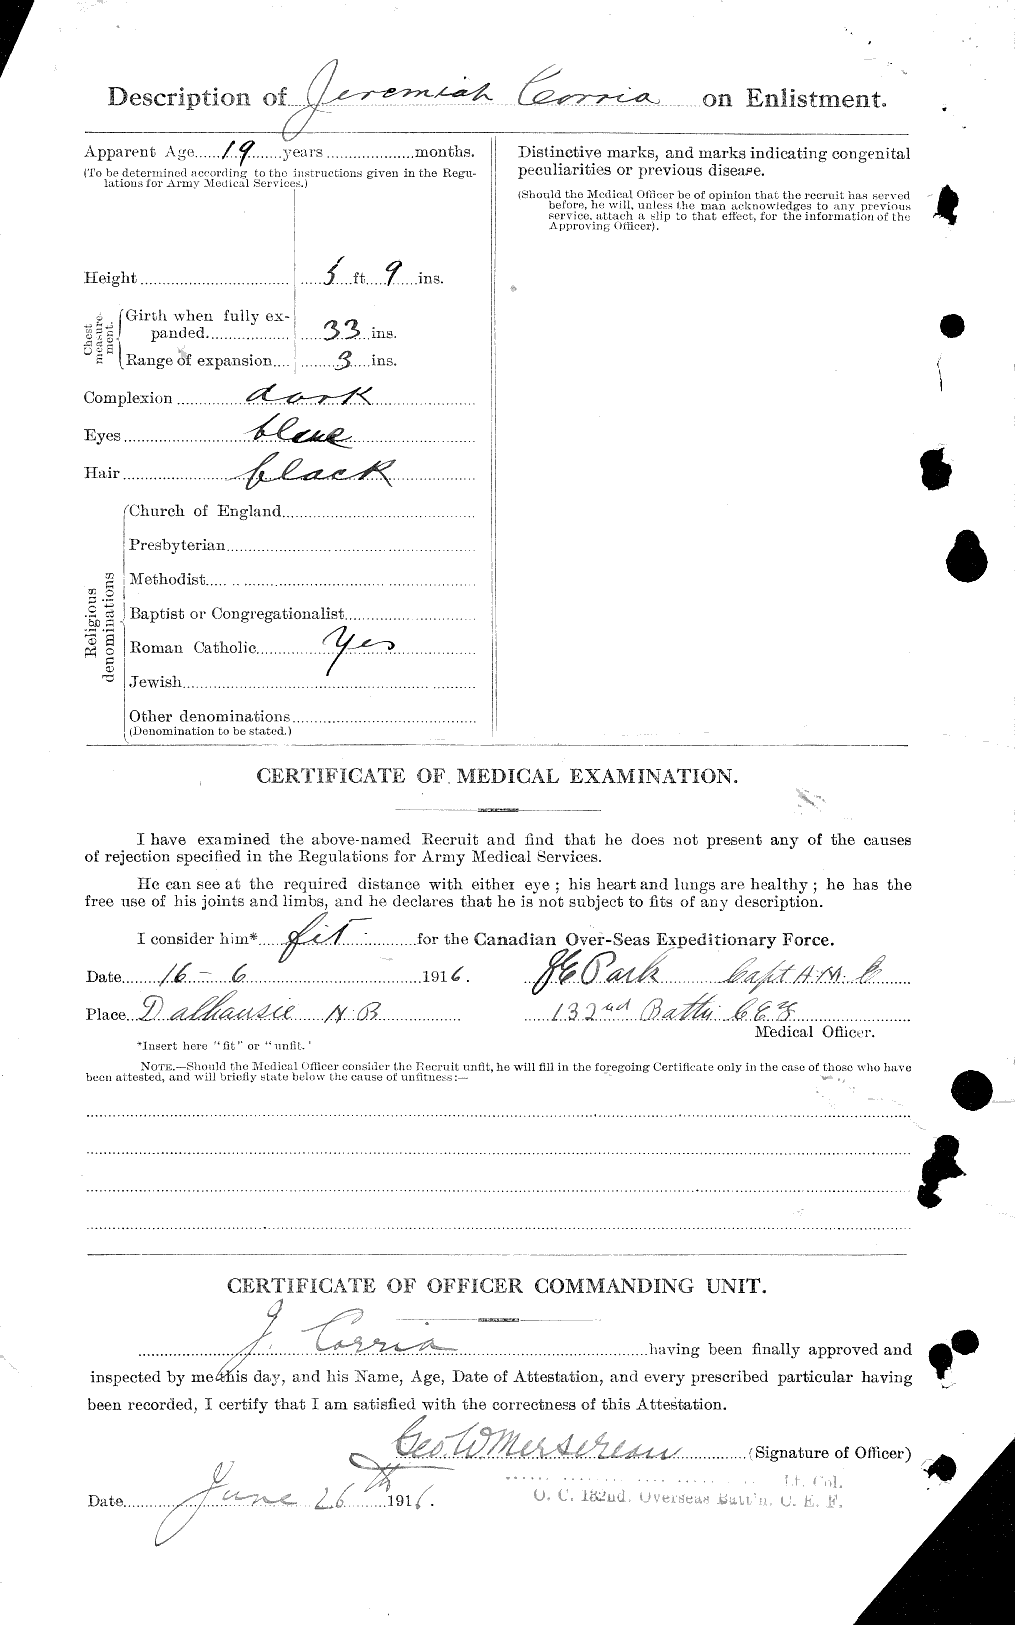 Personnel Records of the First World War - CEF 010560b